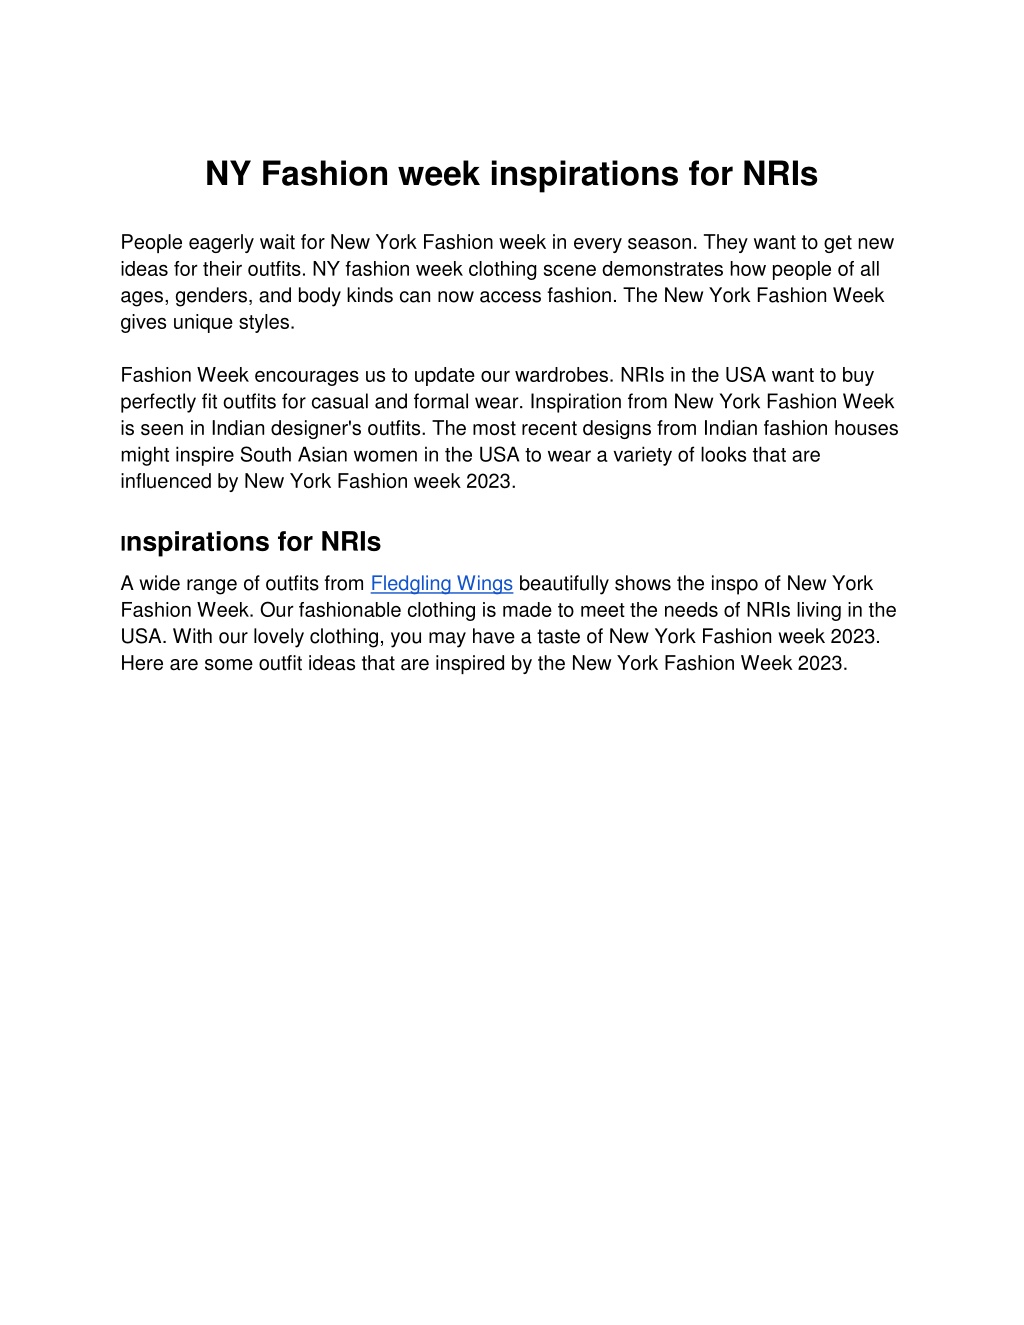 PPT NY Fashion week inspirations for NRIs PowerPoint Presentation